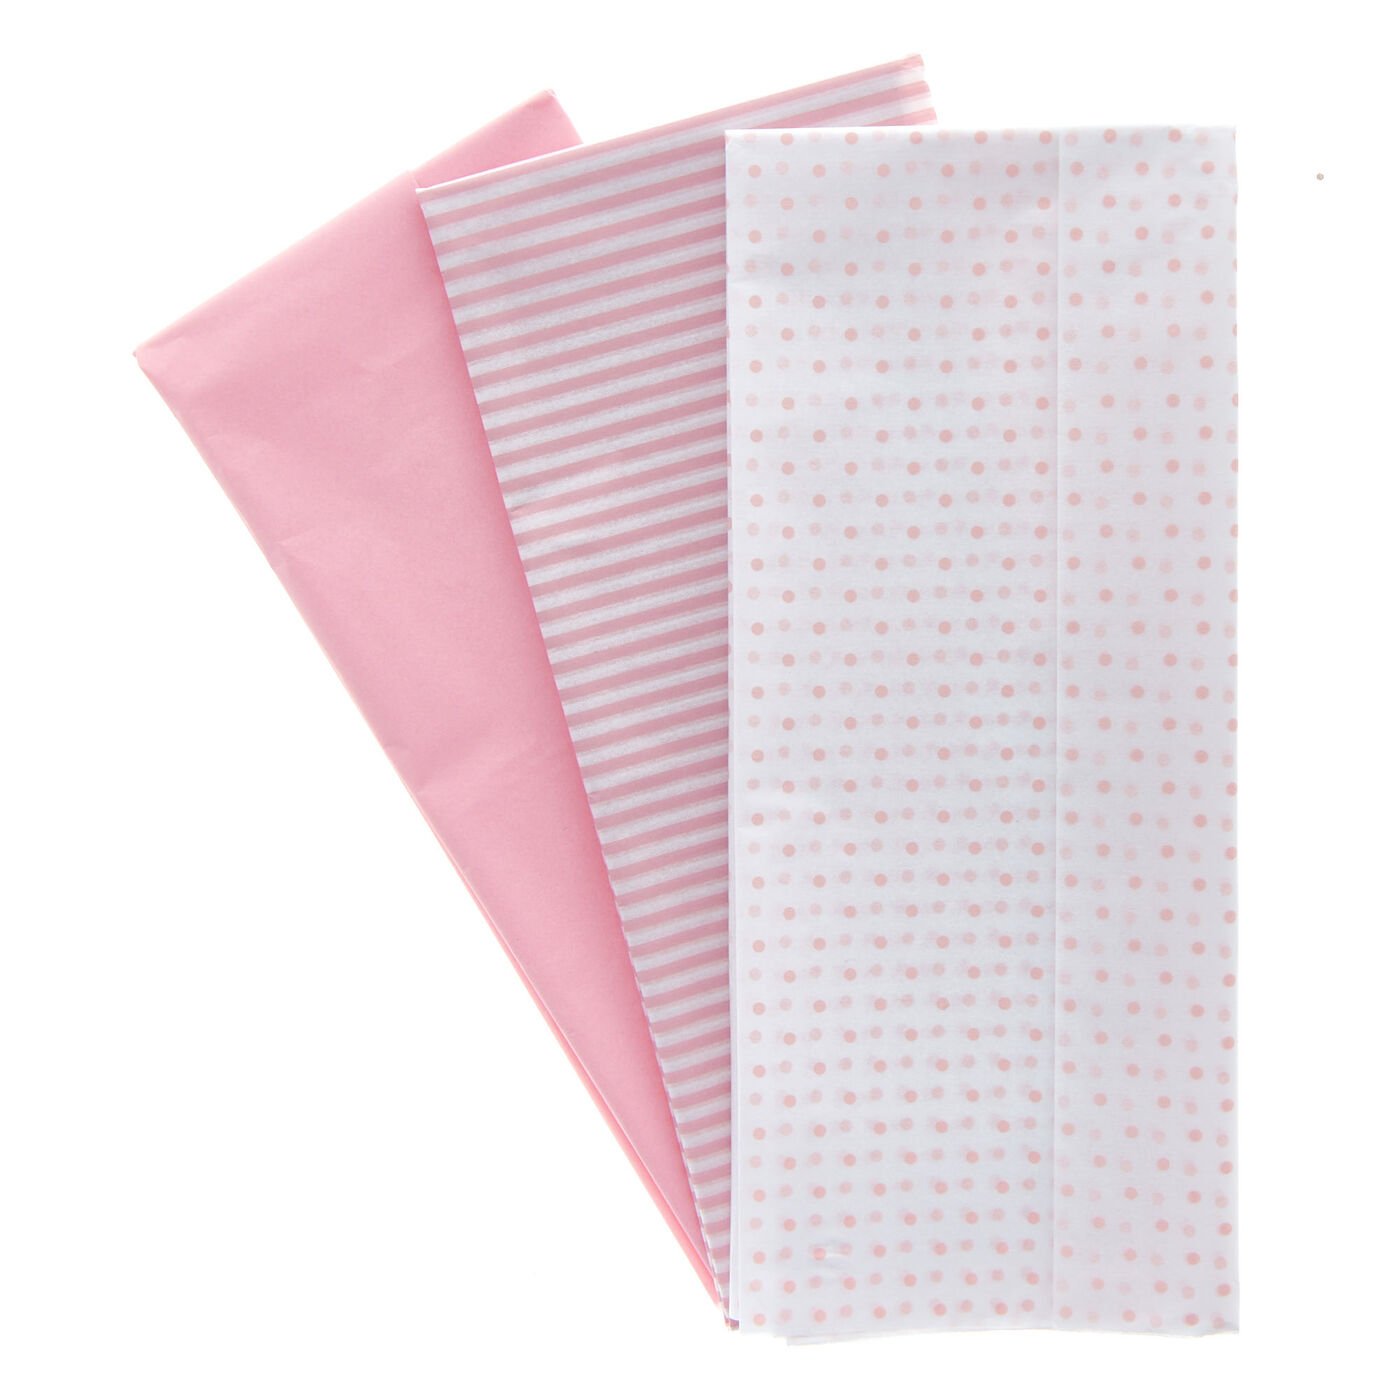 Buy Baby Pink Patterned Tissue Paper - 6 Sheets for GBP 1.99